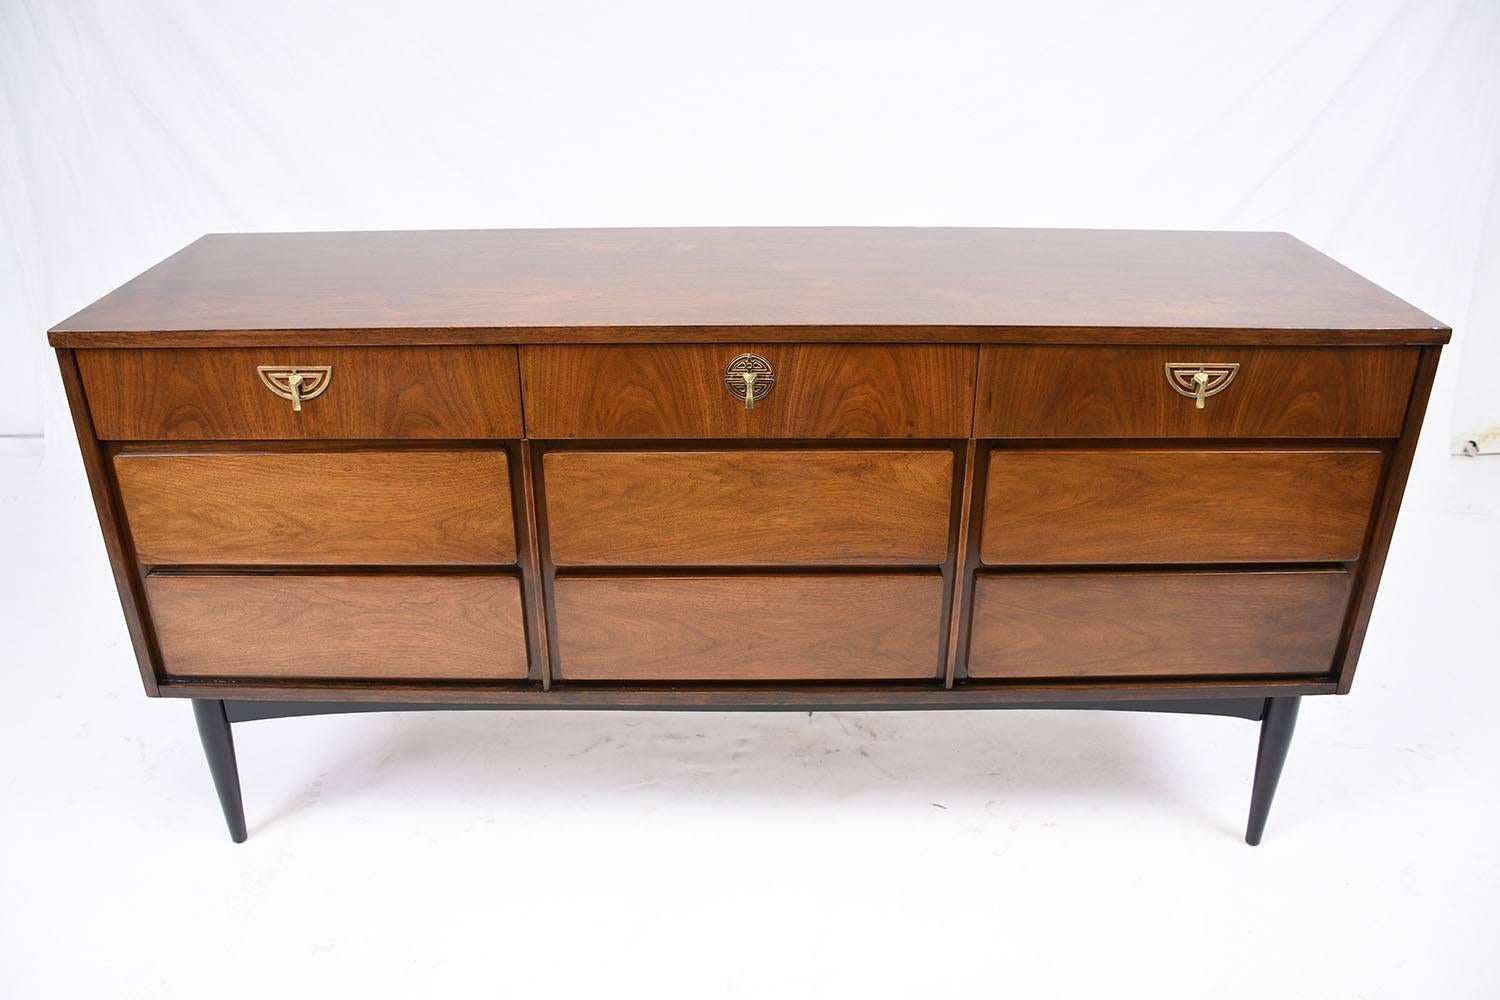 North American Vintage Mid-Century Modern Chest of Drawers